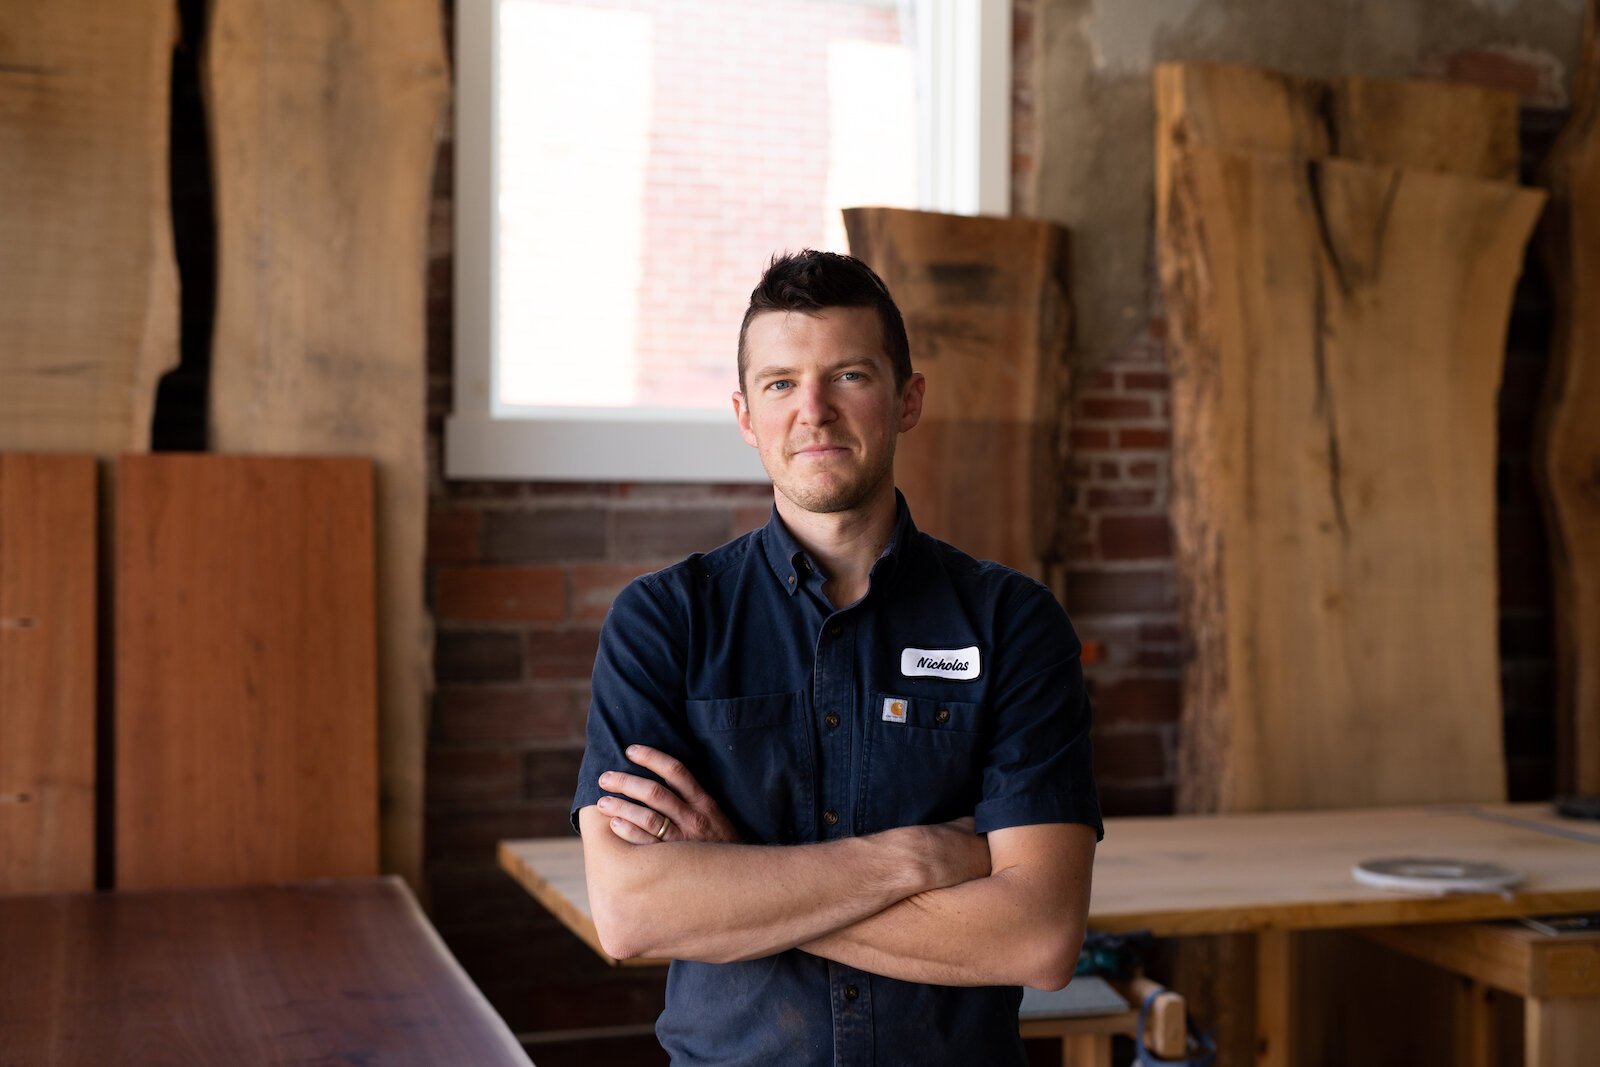 Nicholas Cramer owns Big Tooth Co., a Fort Wayne company that makes quality, heirloom furniture by hand using sustainable business practices.